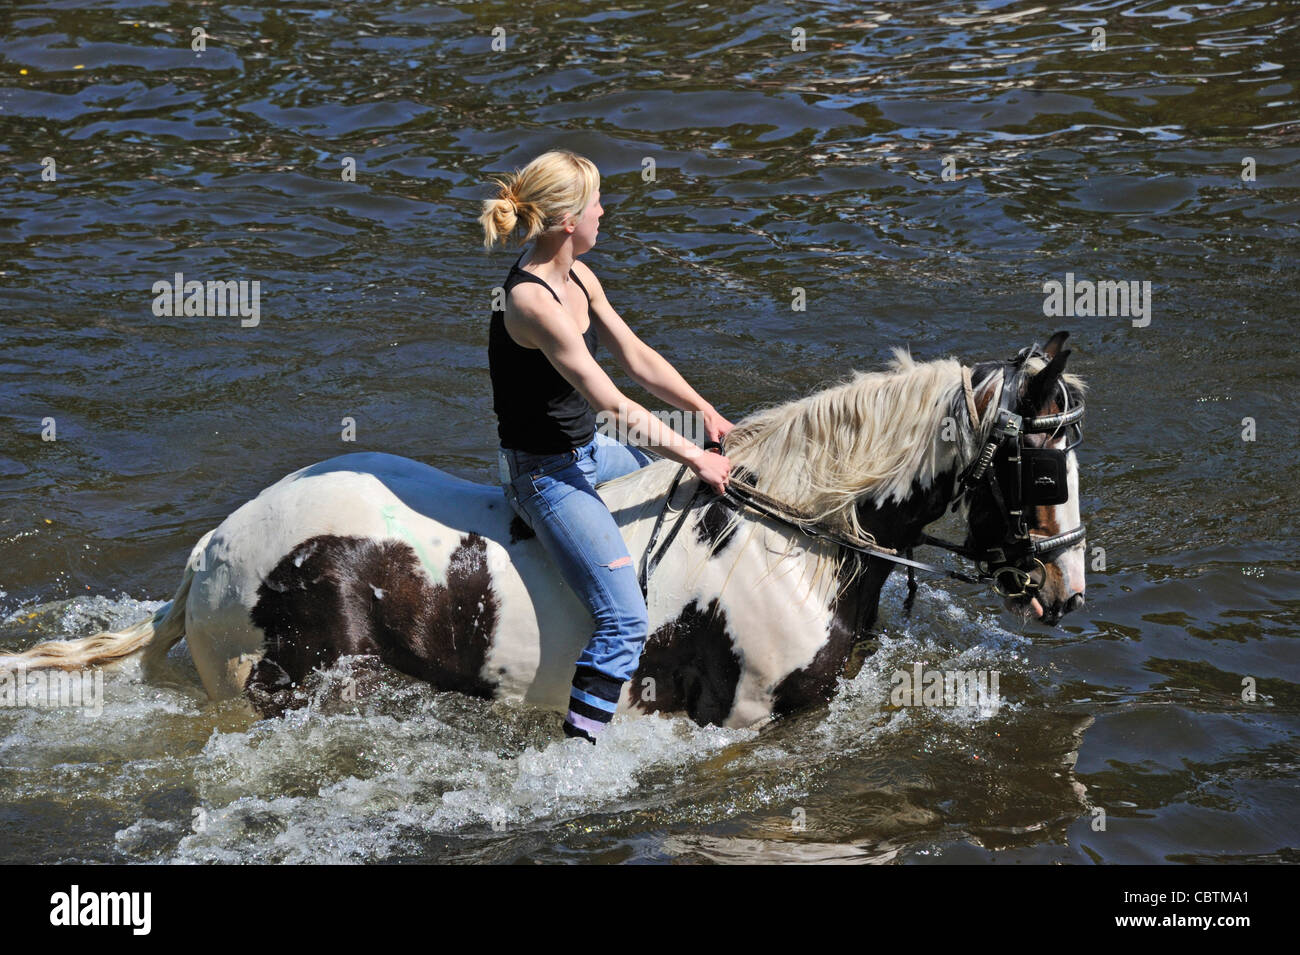 Gypsy traveller girl riding horse in River Eden. Appleby Horse Fair. Appleby-in-Westmorland, Cumbria, England, United Kingdom. Stock Photo